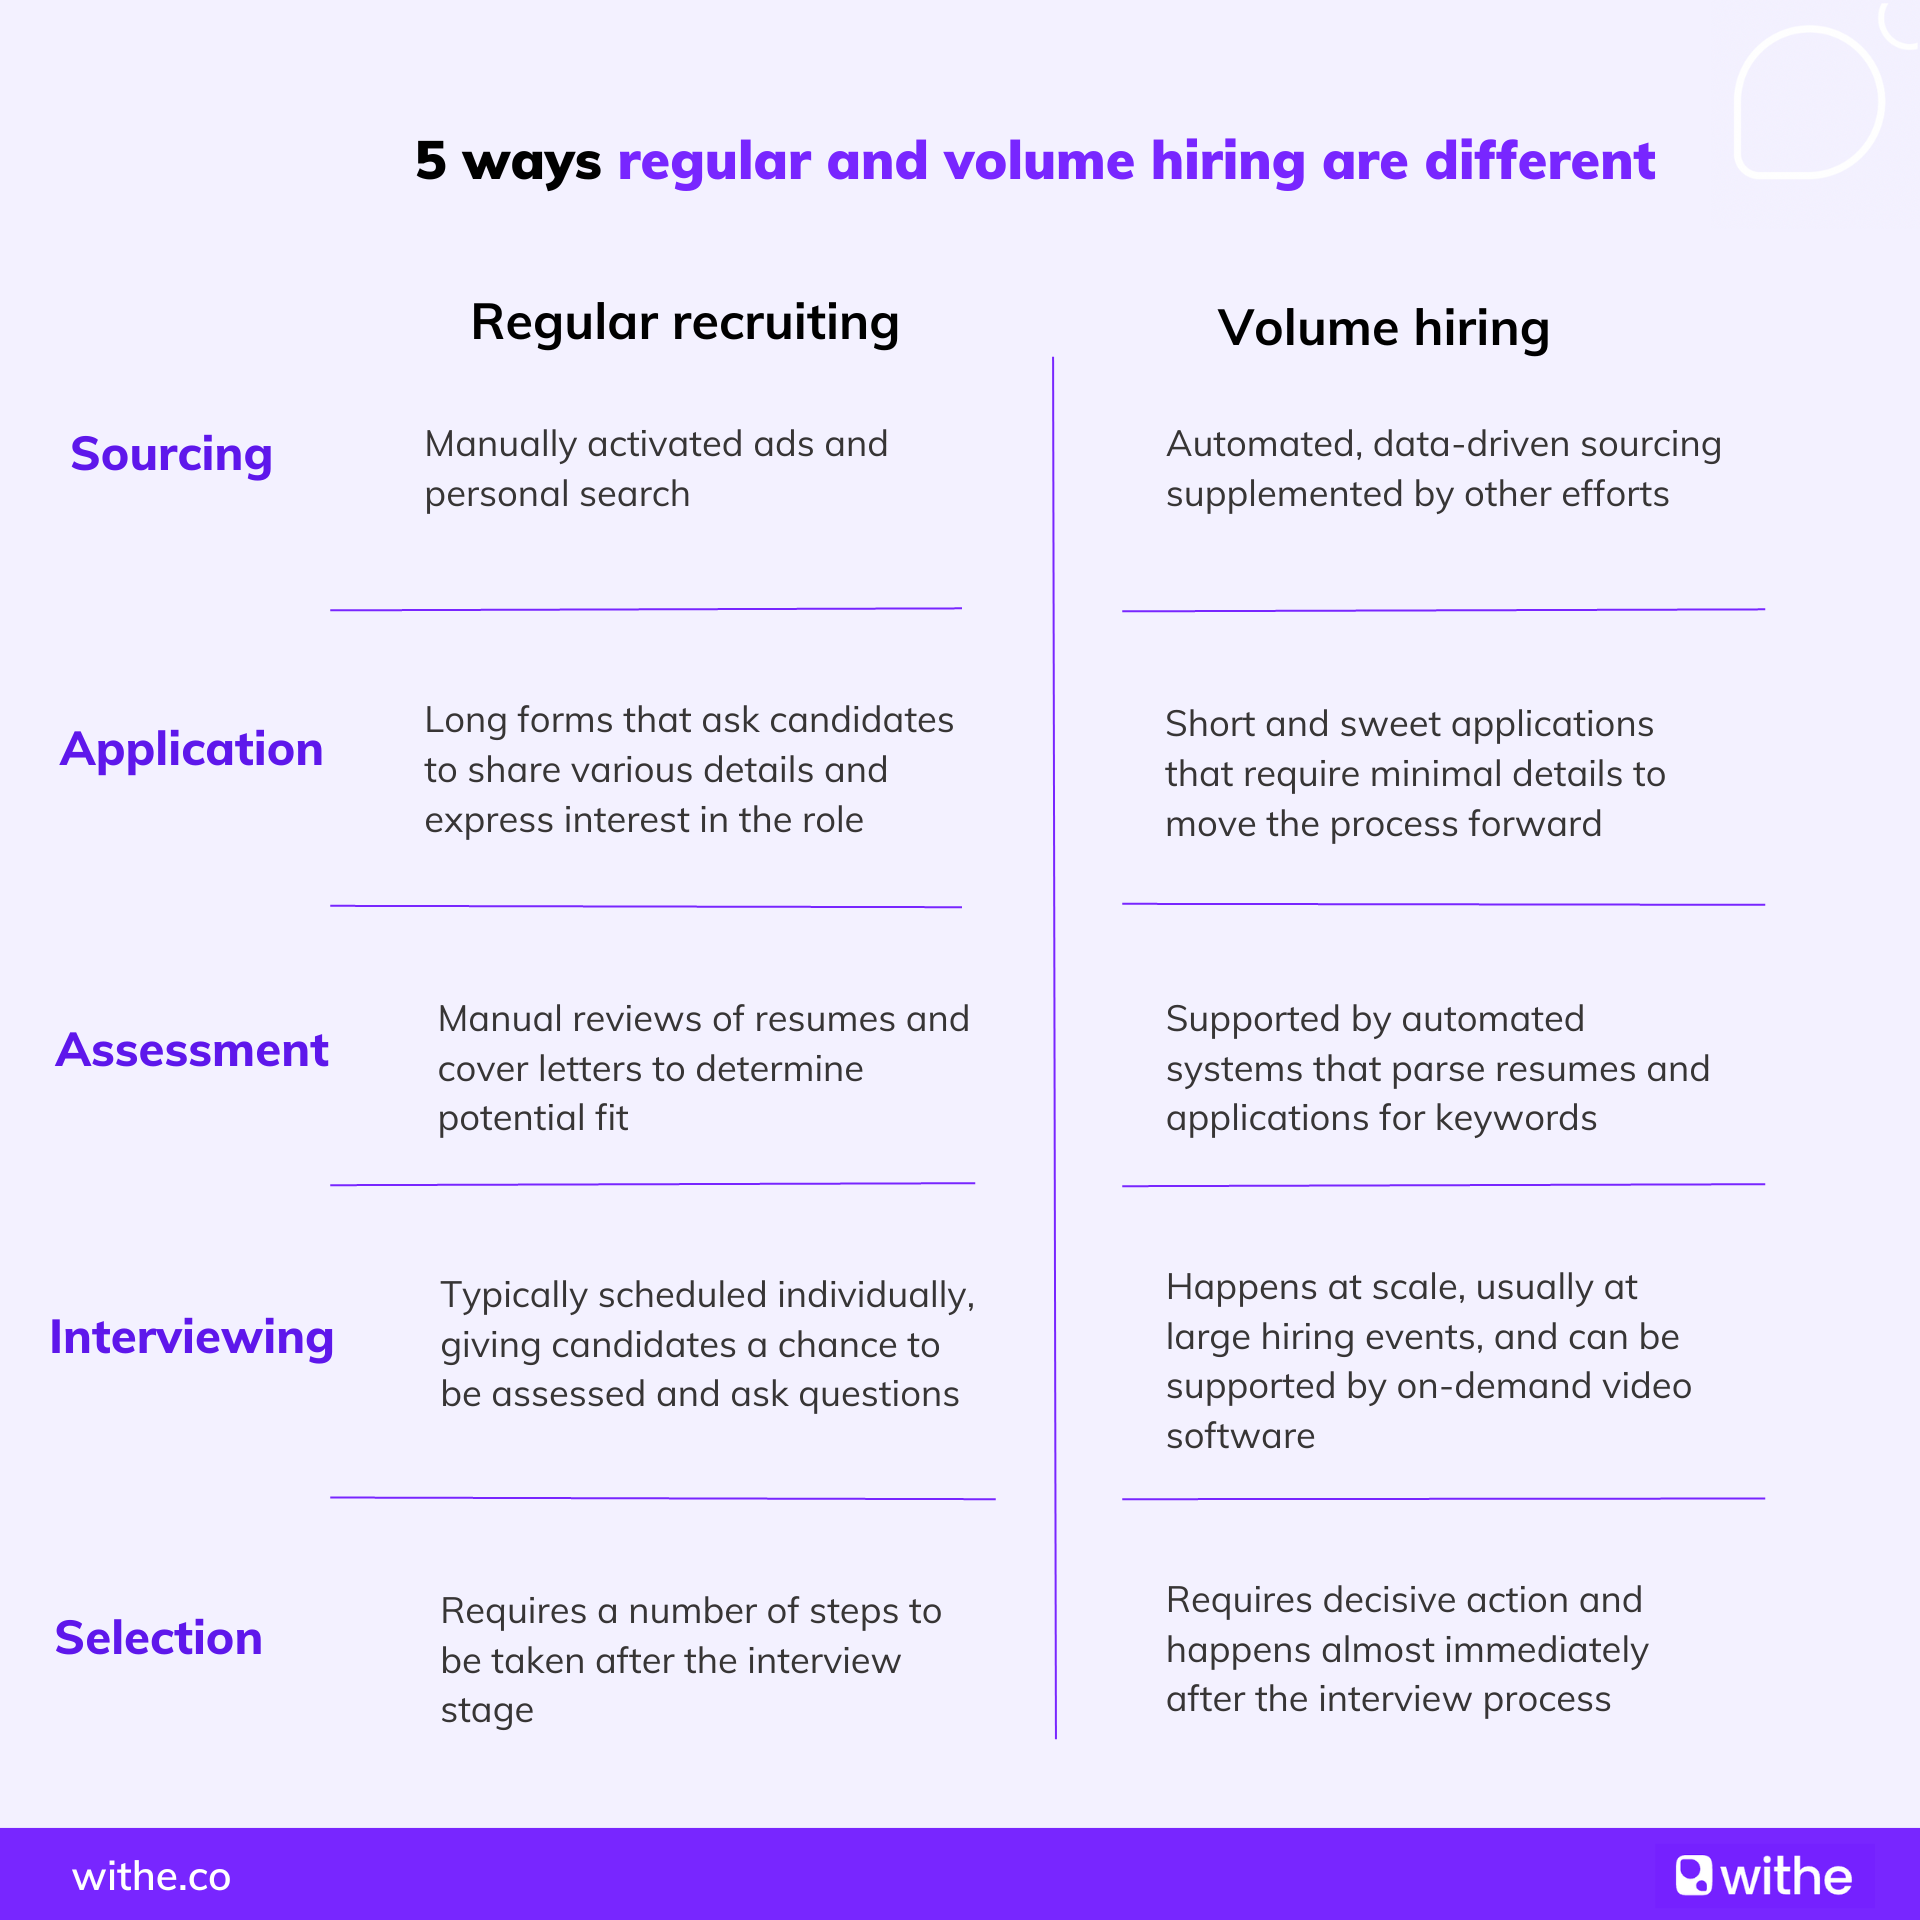 5 ways regular and volume hiring are different